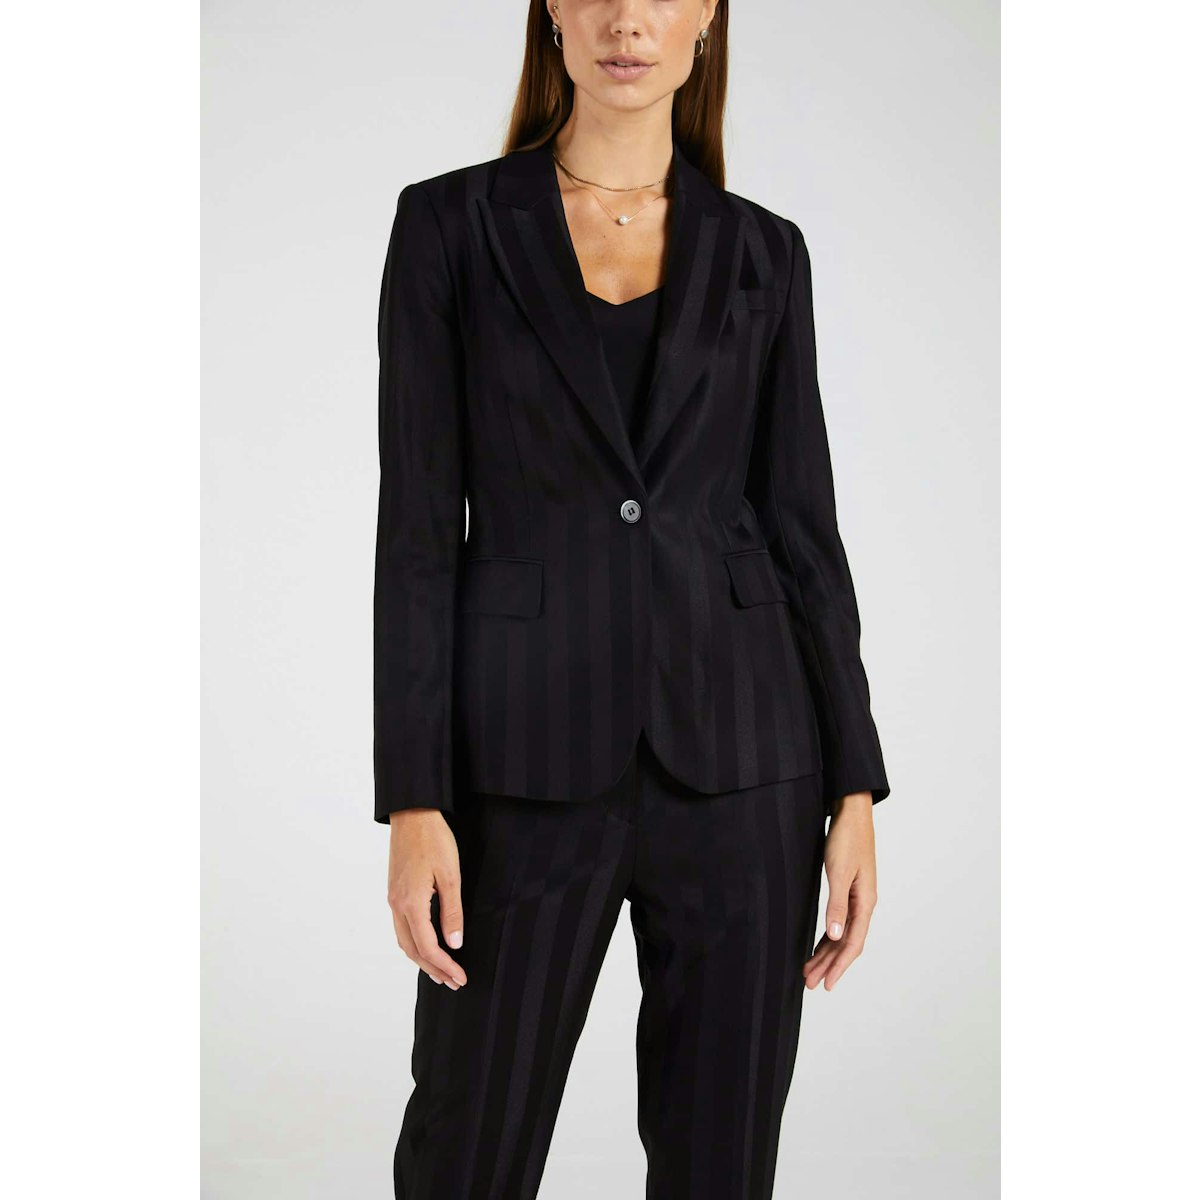 InStitchu Collection The Watts Thick Black Pinstripe Jacket